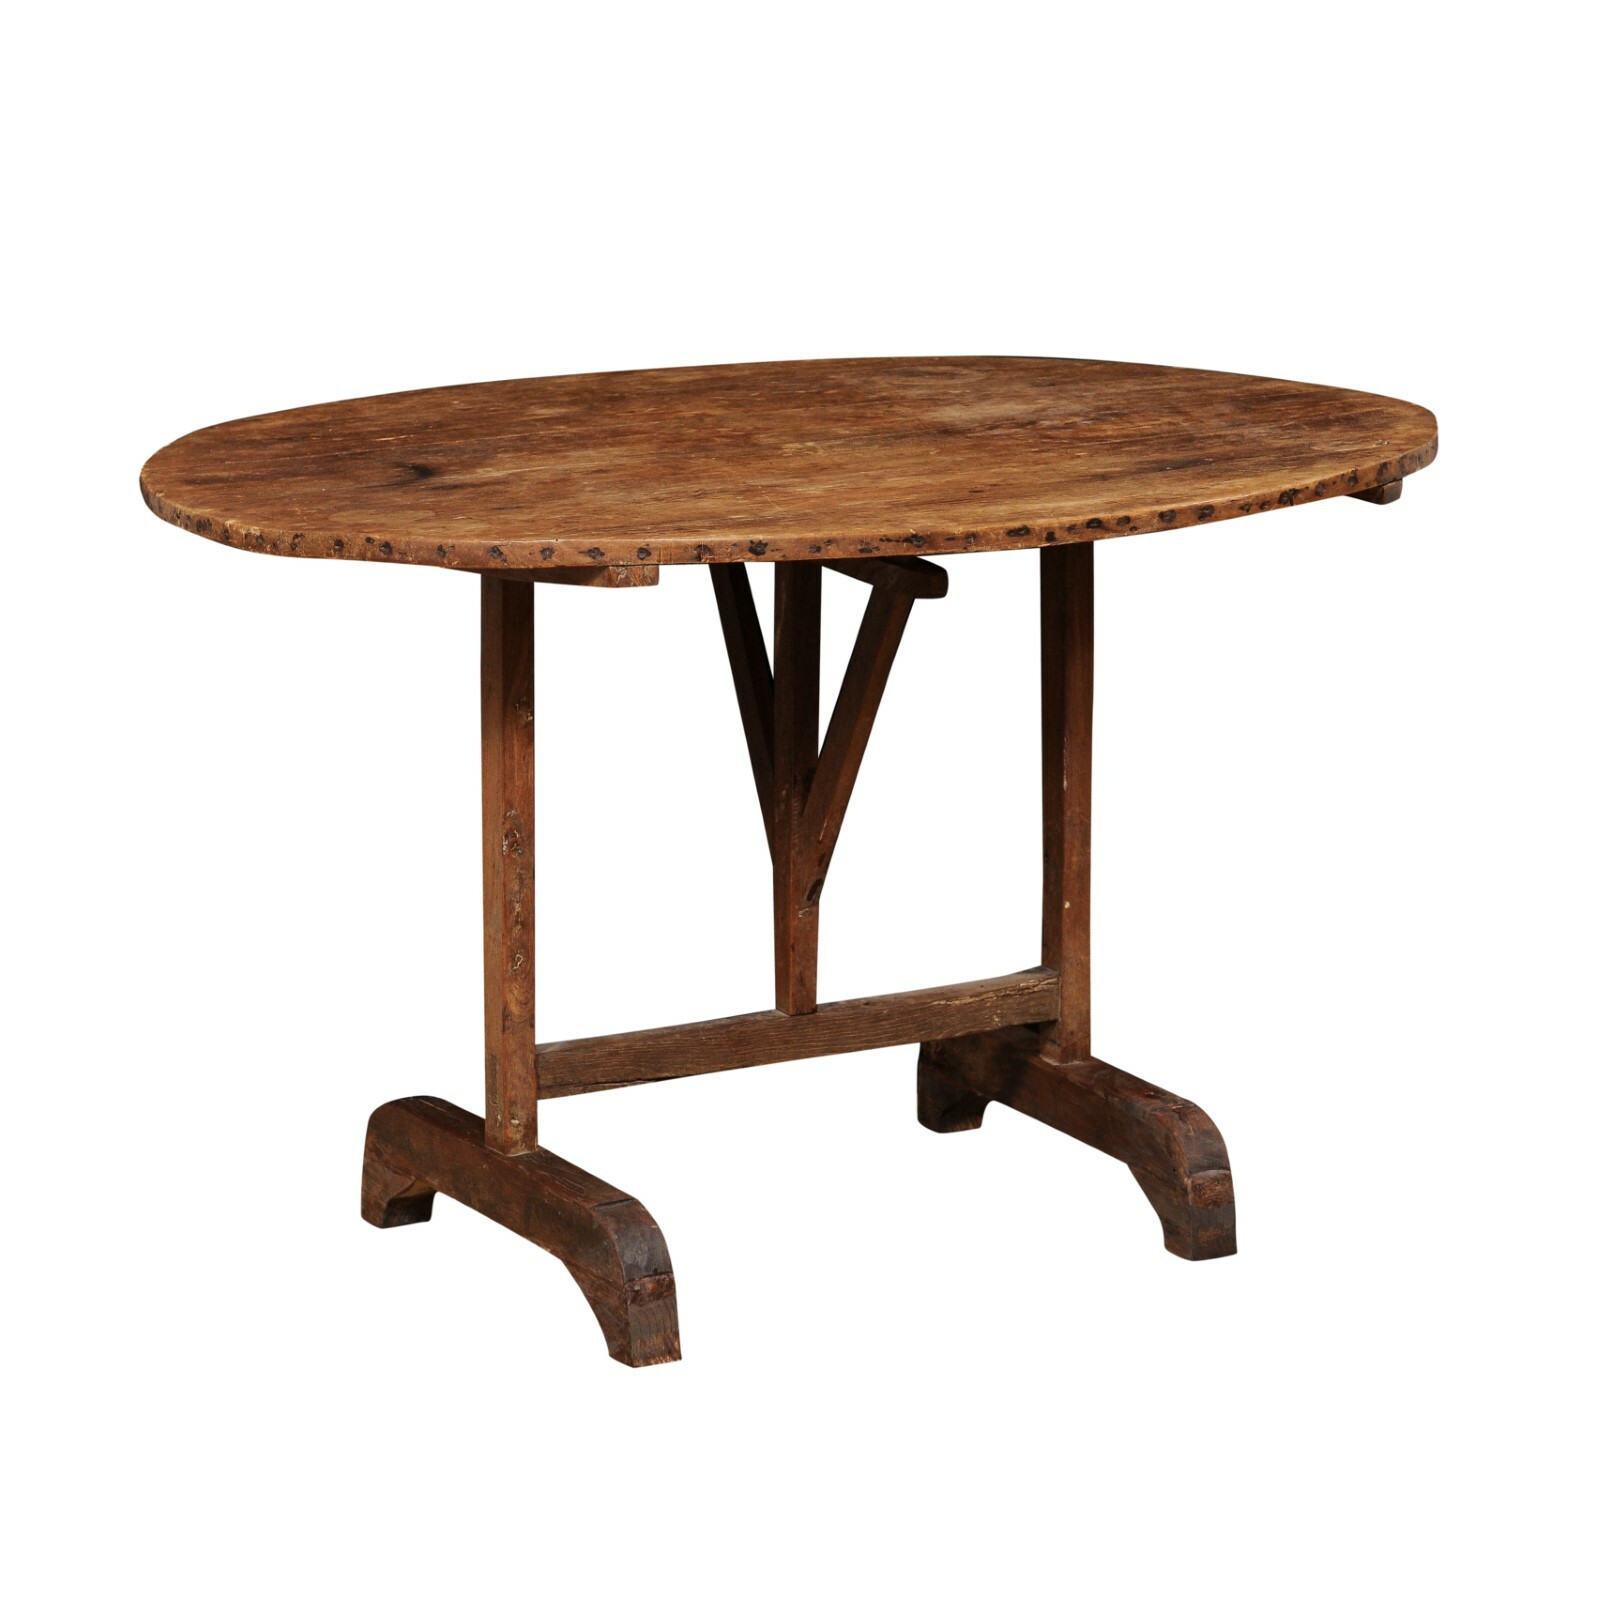 French Vitner's Oval Wine Table, 19th C.